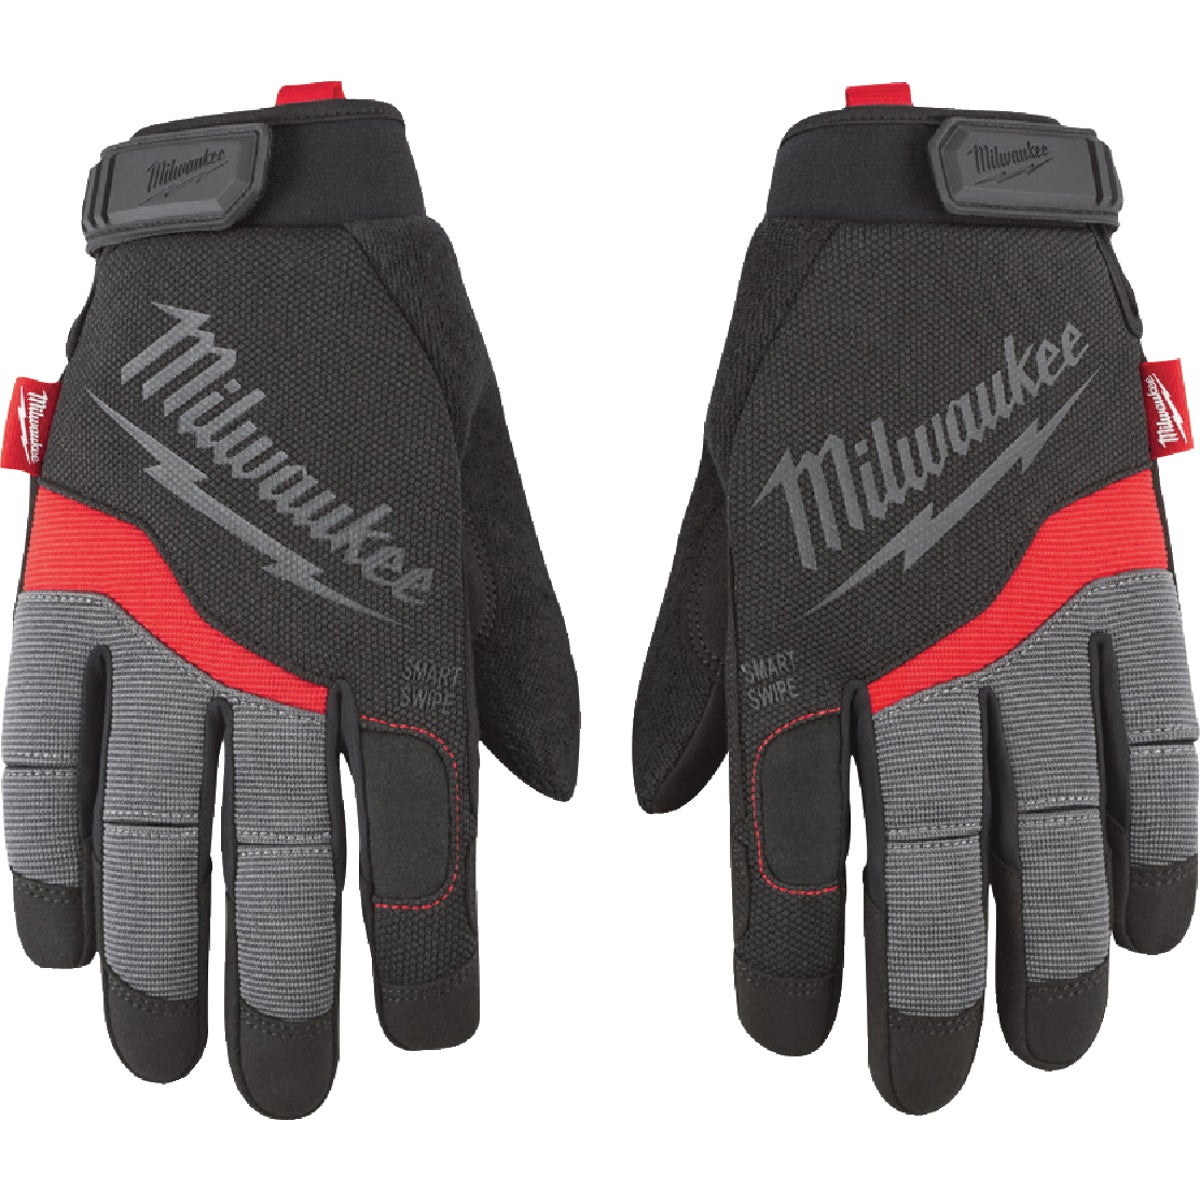 Item 705354, Lightweight work glove designed with a breathable lining for all-day 